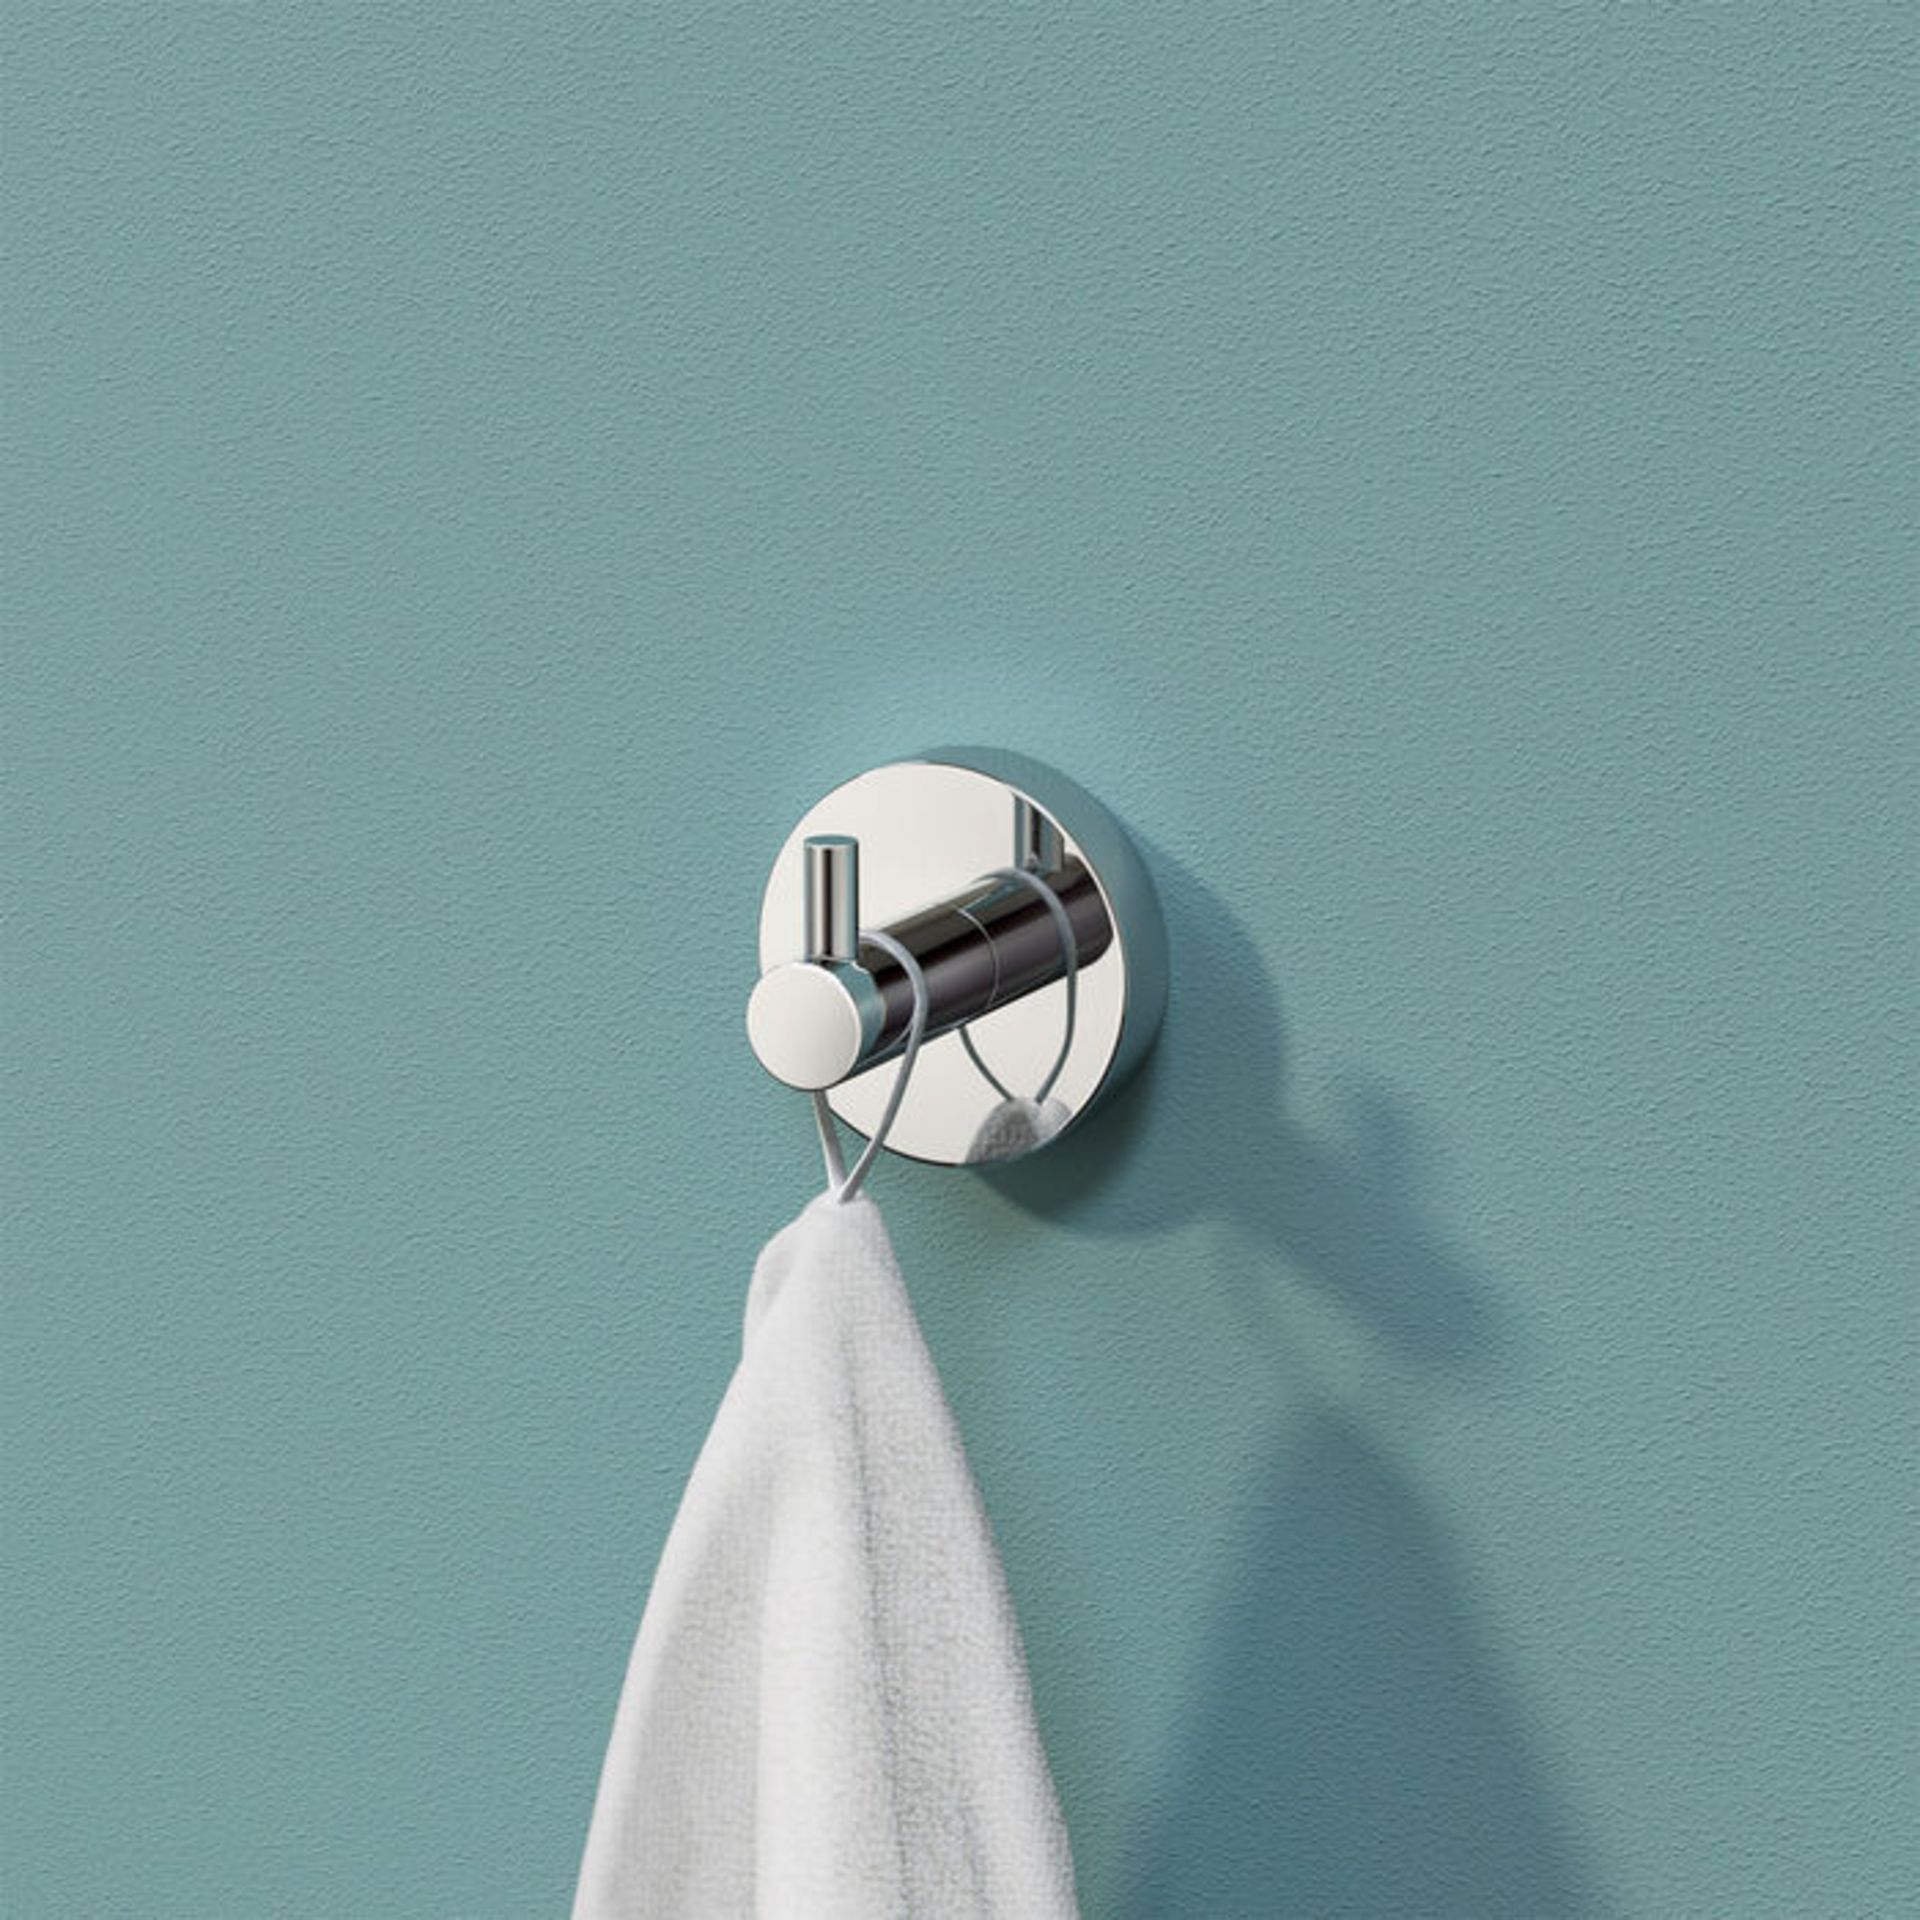 (E1018) Finsbury Robe Hook. Finishes your bathroom with a little extra functionality and style ...